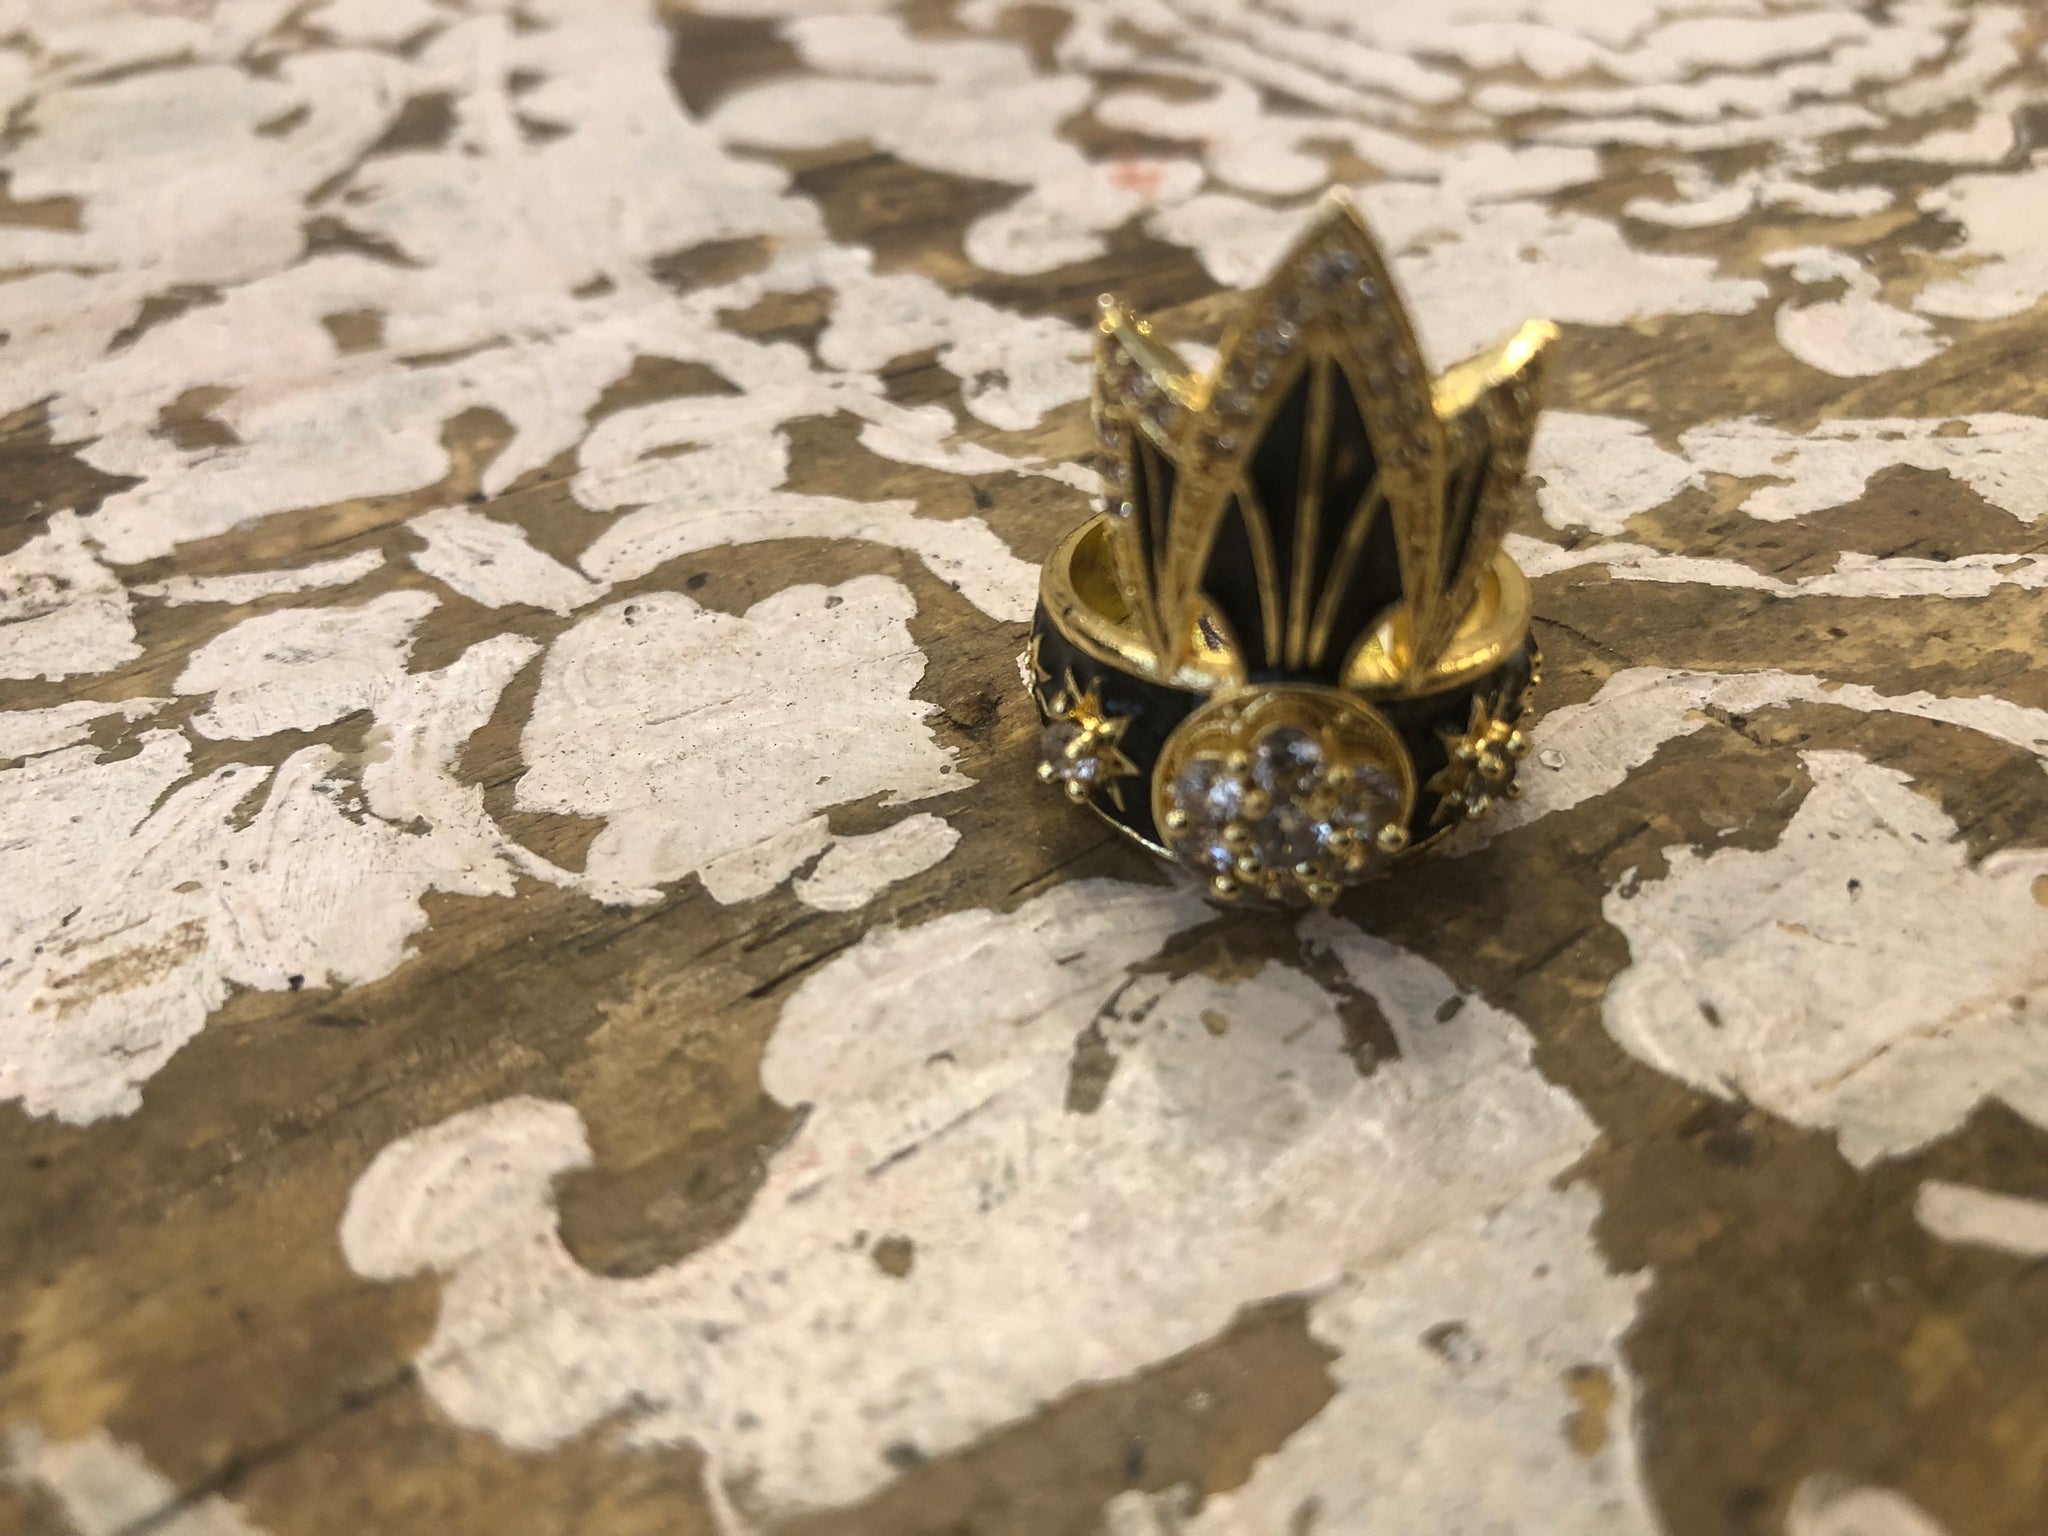 LUX DIVINE Tiger Lilly Ring